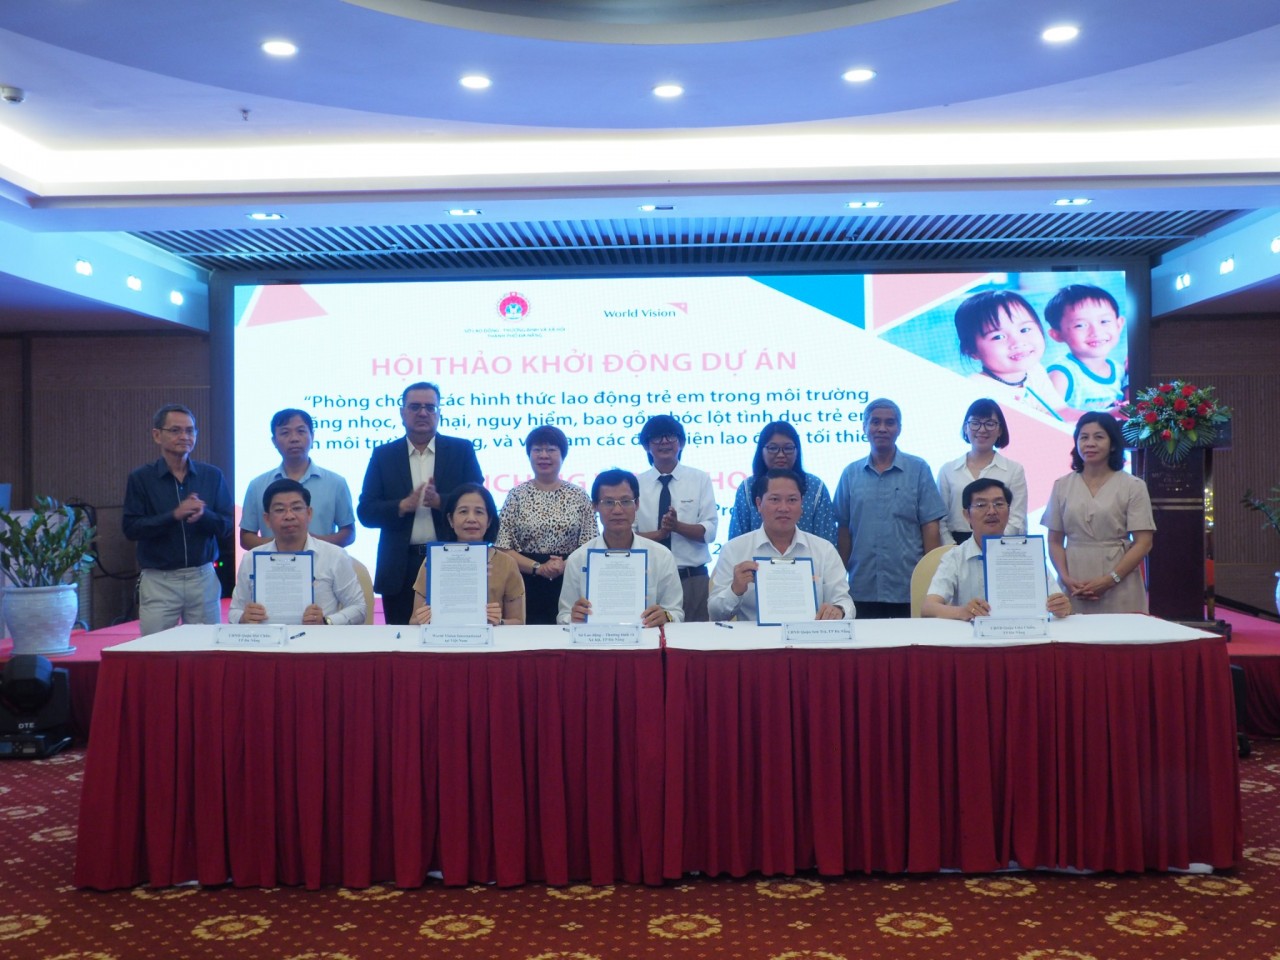 Project Against Child Exploitation Launched in Da Nang City